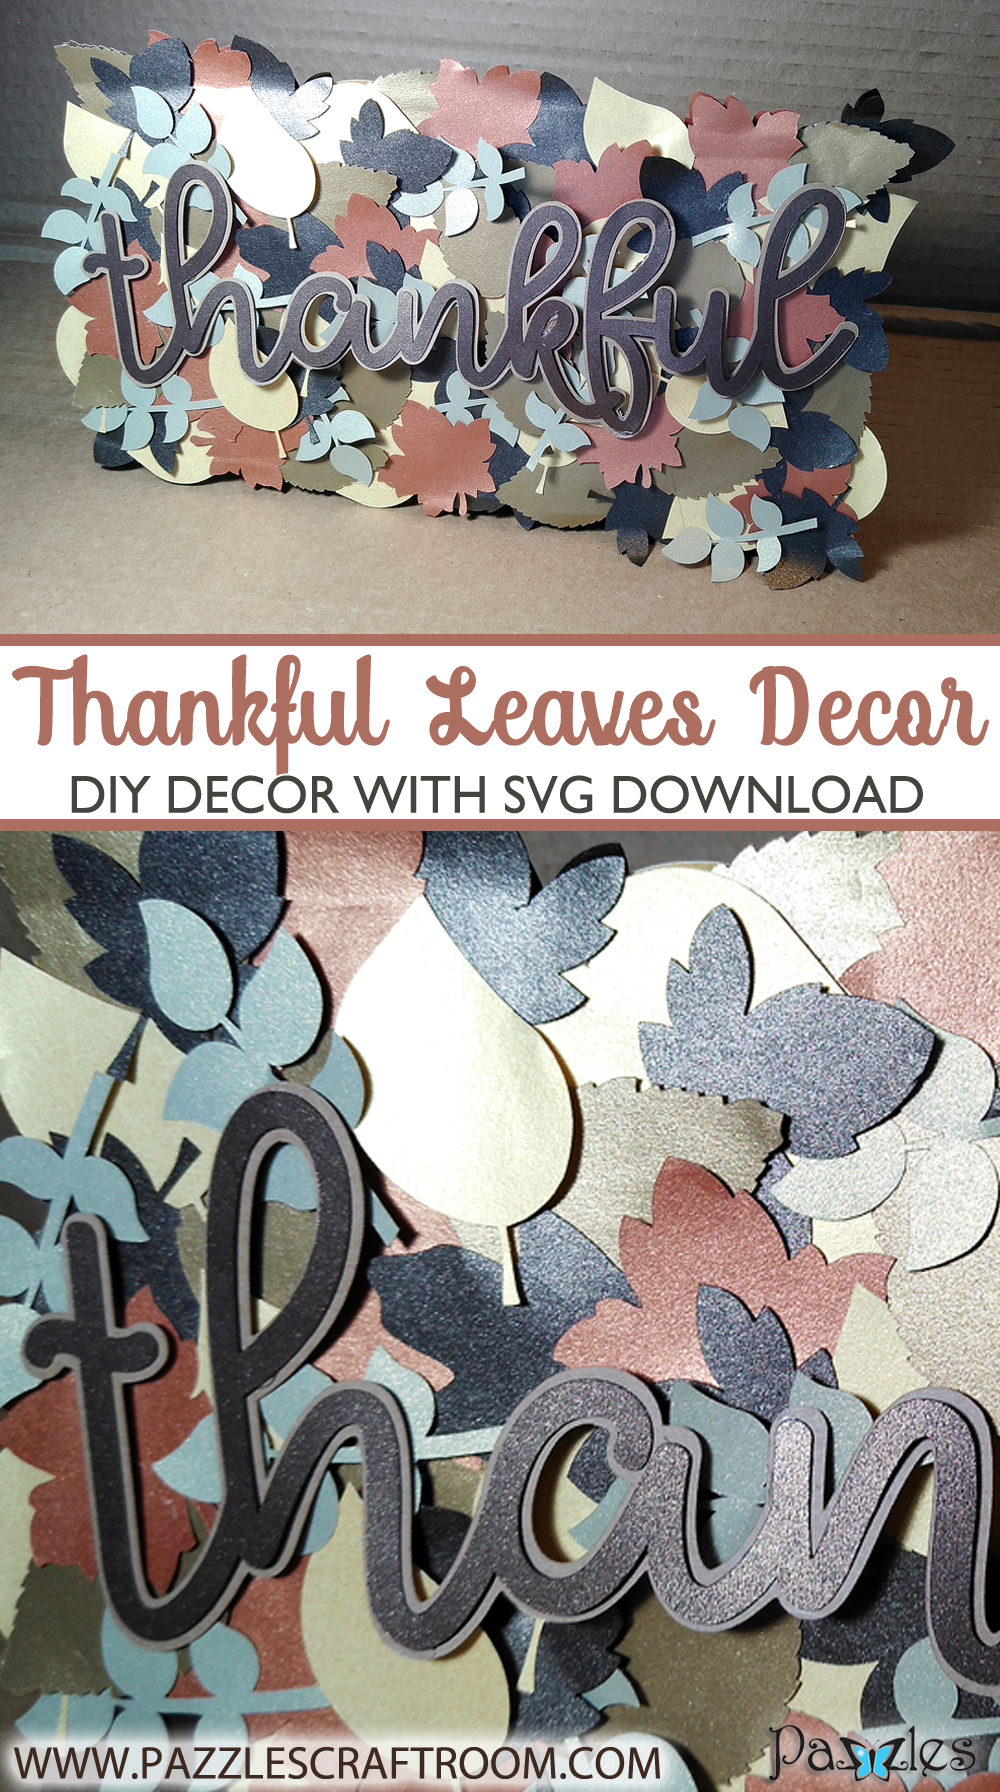 Pazzles Thankful Leaves DIY Fall Decor by Renee Smart. SVG download compatible with all major electronic cutters including Pazzles Inspiration, Cricut, and Silhouette Cameo.